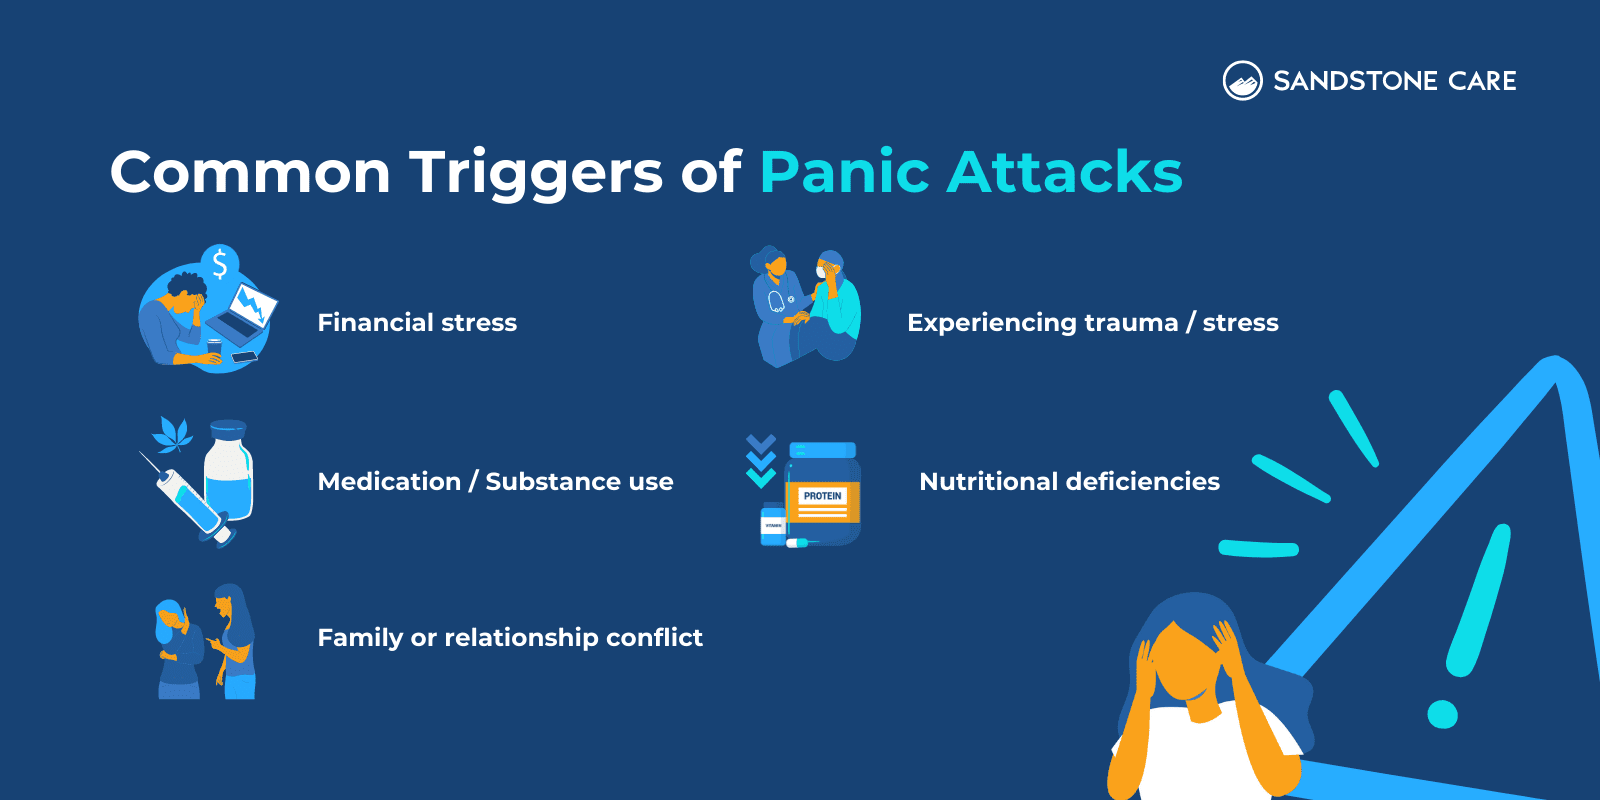 "Common Triggers Of Panic Attacks" listed with relevant graphics